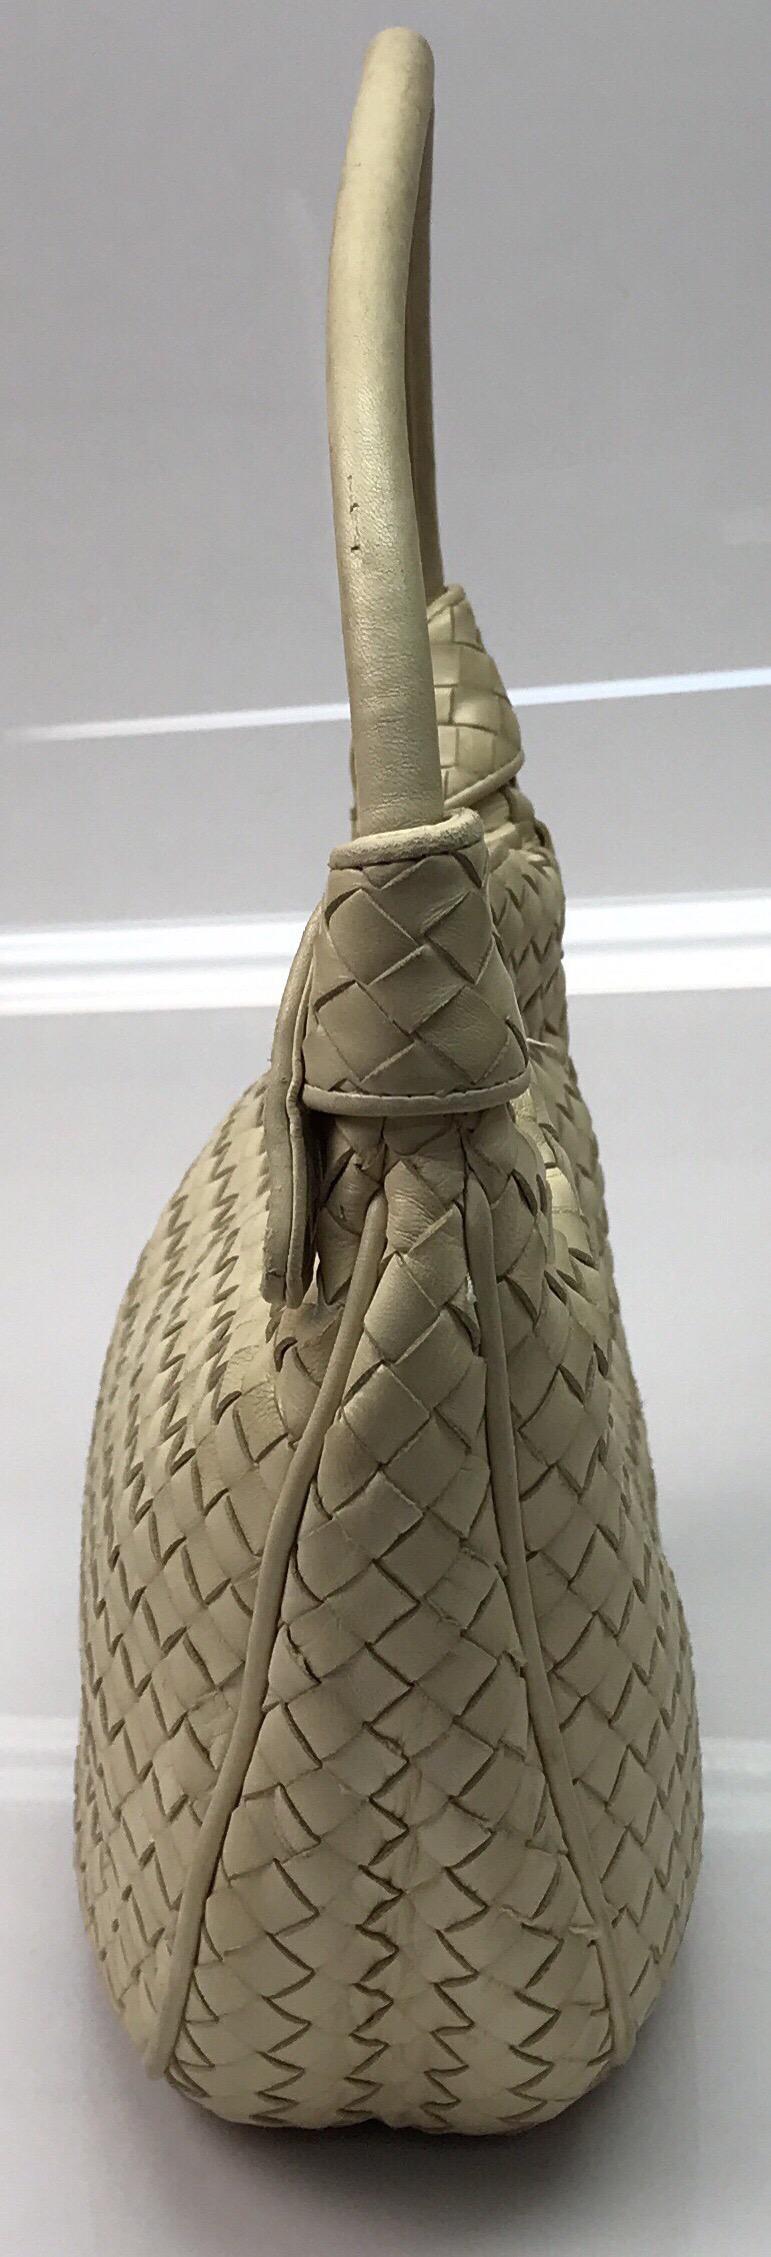 Bottega Venetta Cream Purse w/ Weave Pattern. This adorable Bottega Venetta purse is in good condition. There are some markings on the leather, located at the bottom of the bag. The handles also show some sign of use, as shown in picture. This bag